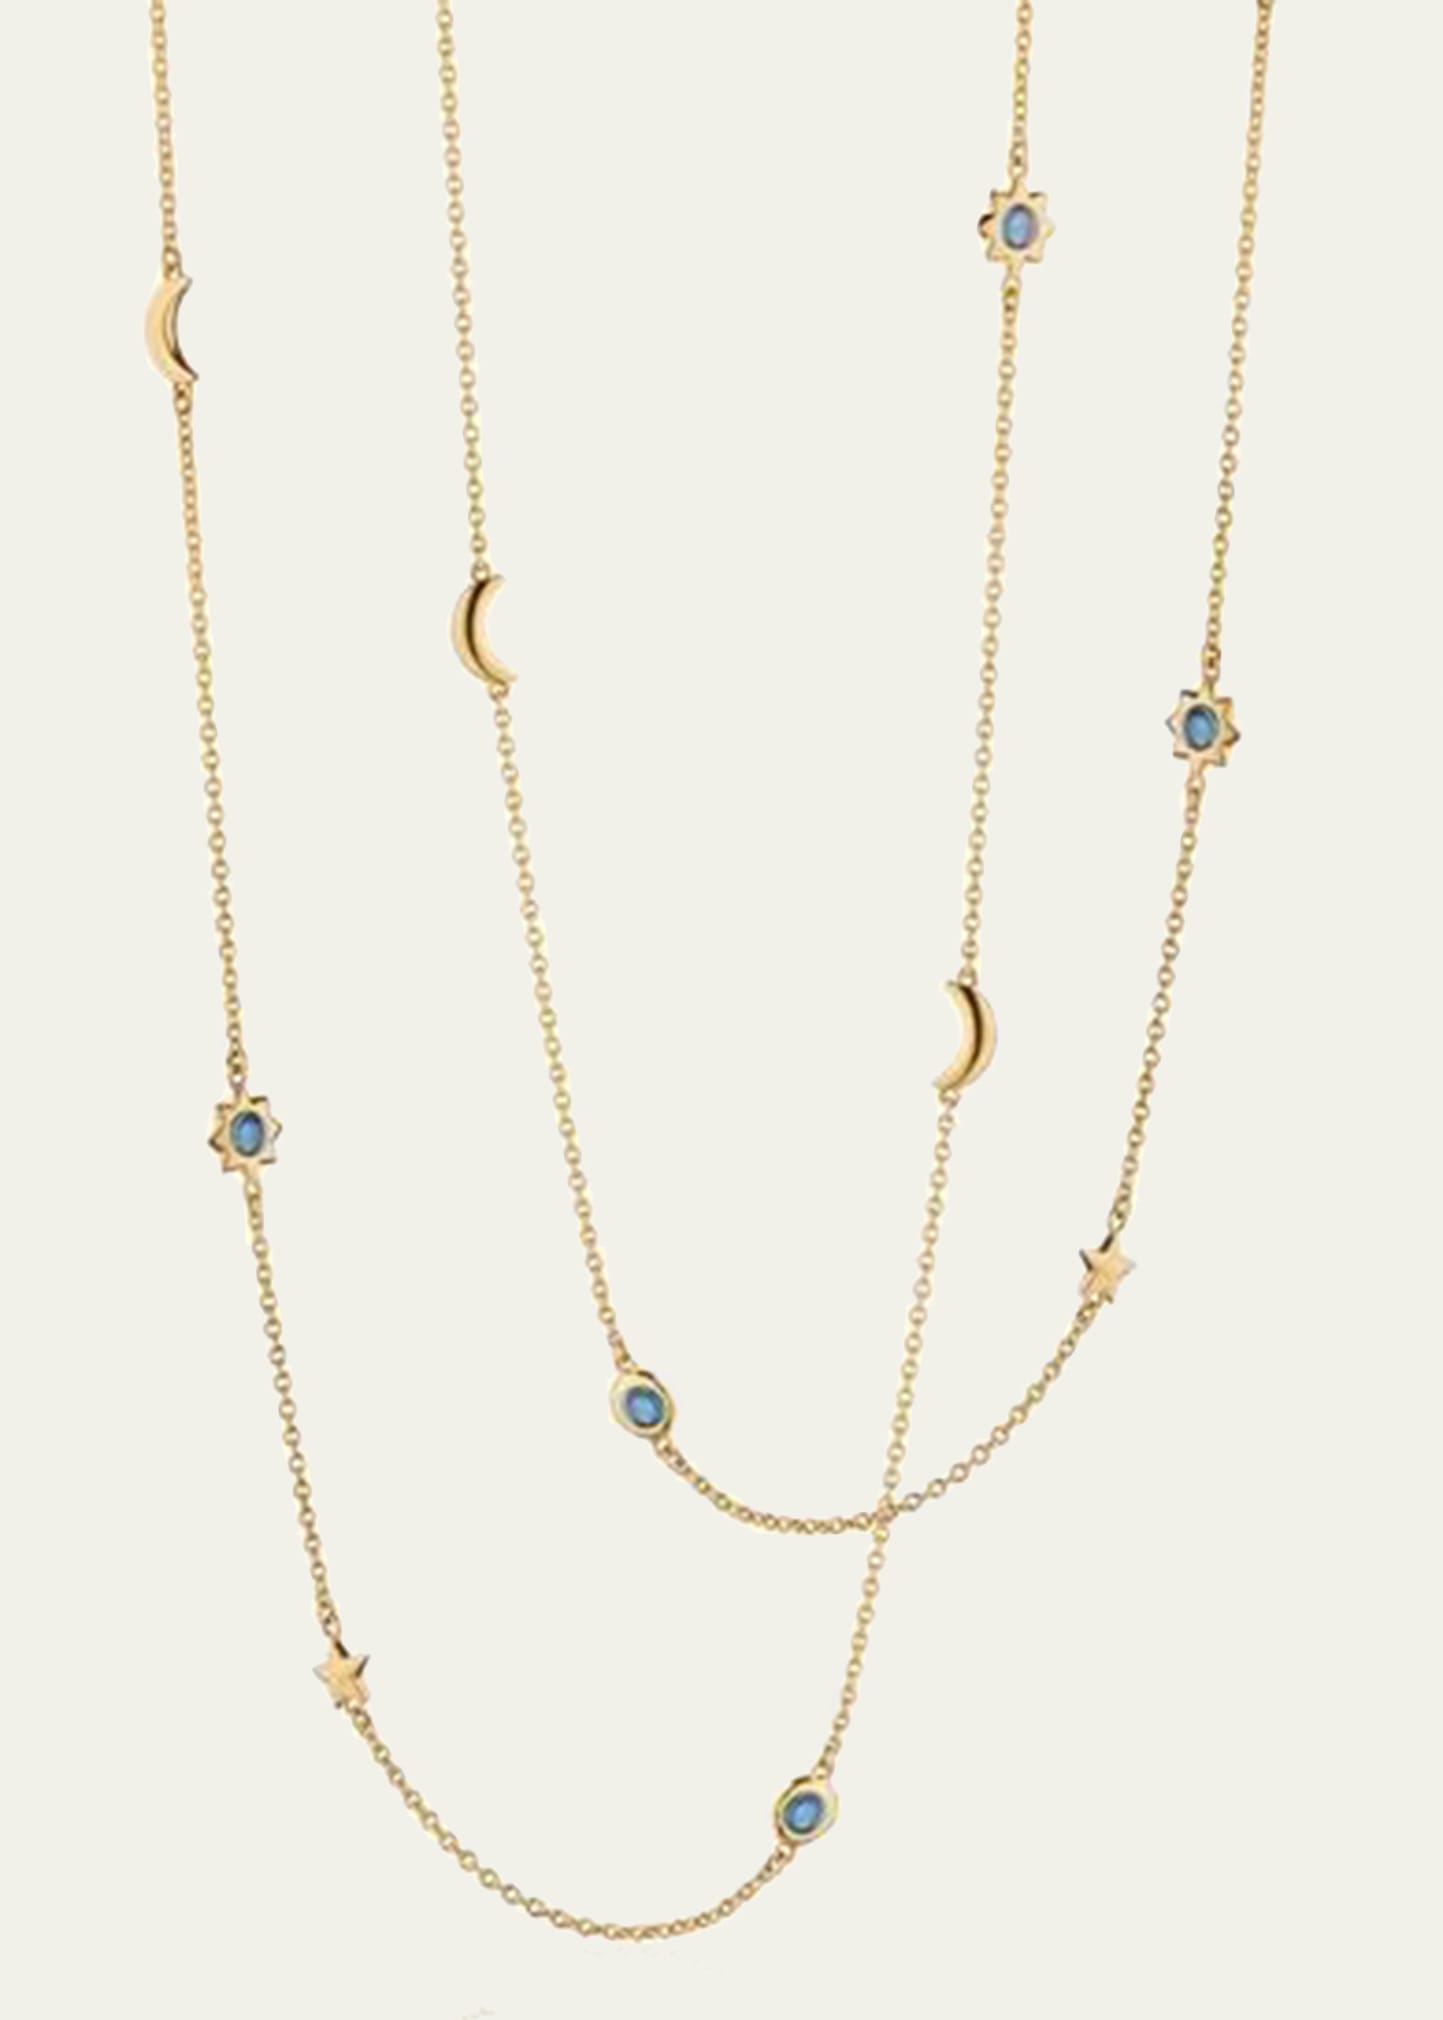 Gold My Sun Moon And Stars Layering Chain With London Blue Topaz Suns And White Diamond Moons And Stars